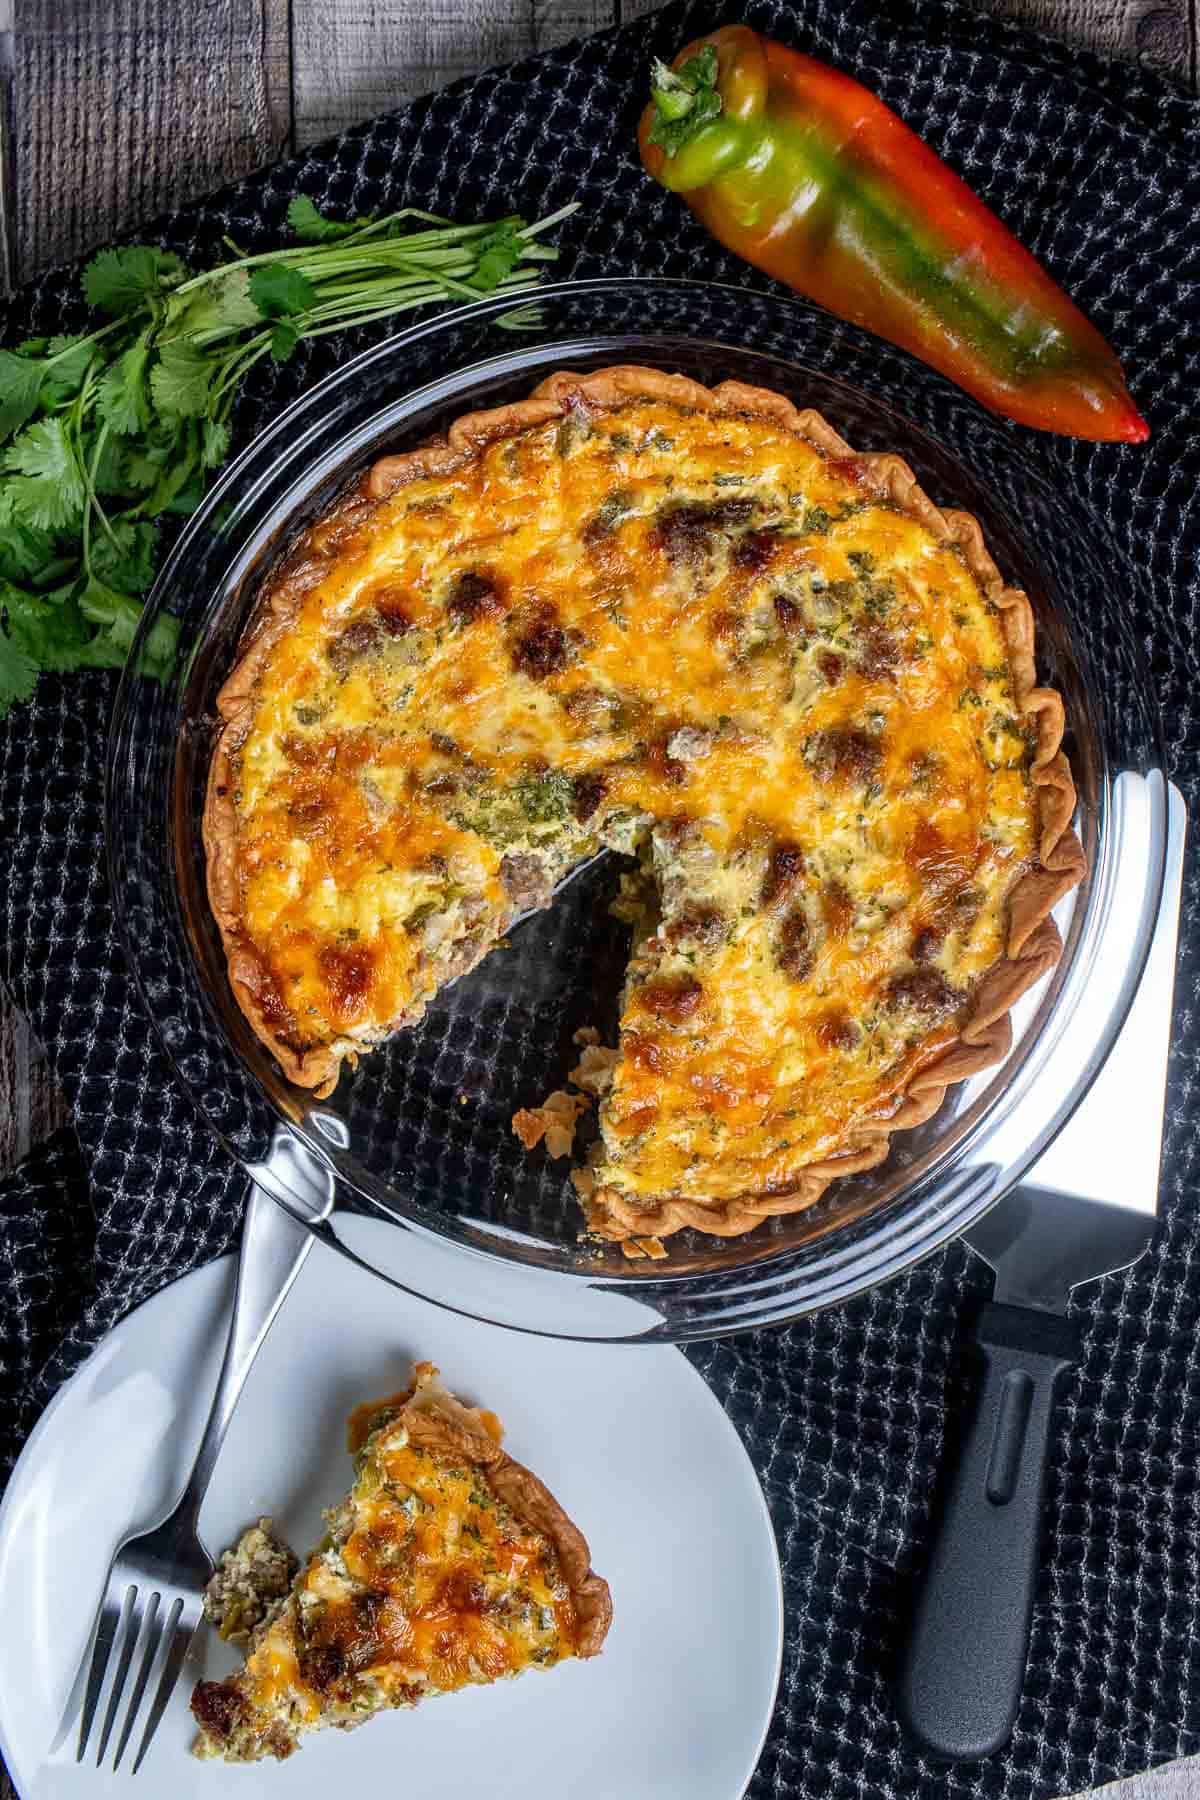 Overhead view of Hatch chile sausage quiche in a glass pie dish with a slice on a white plate in front of it.